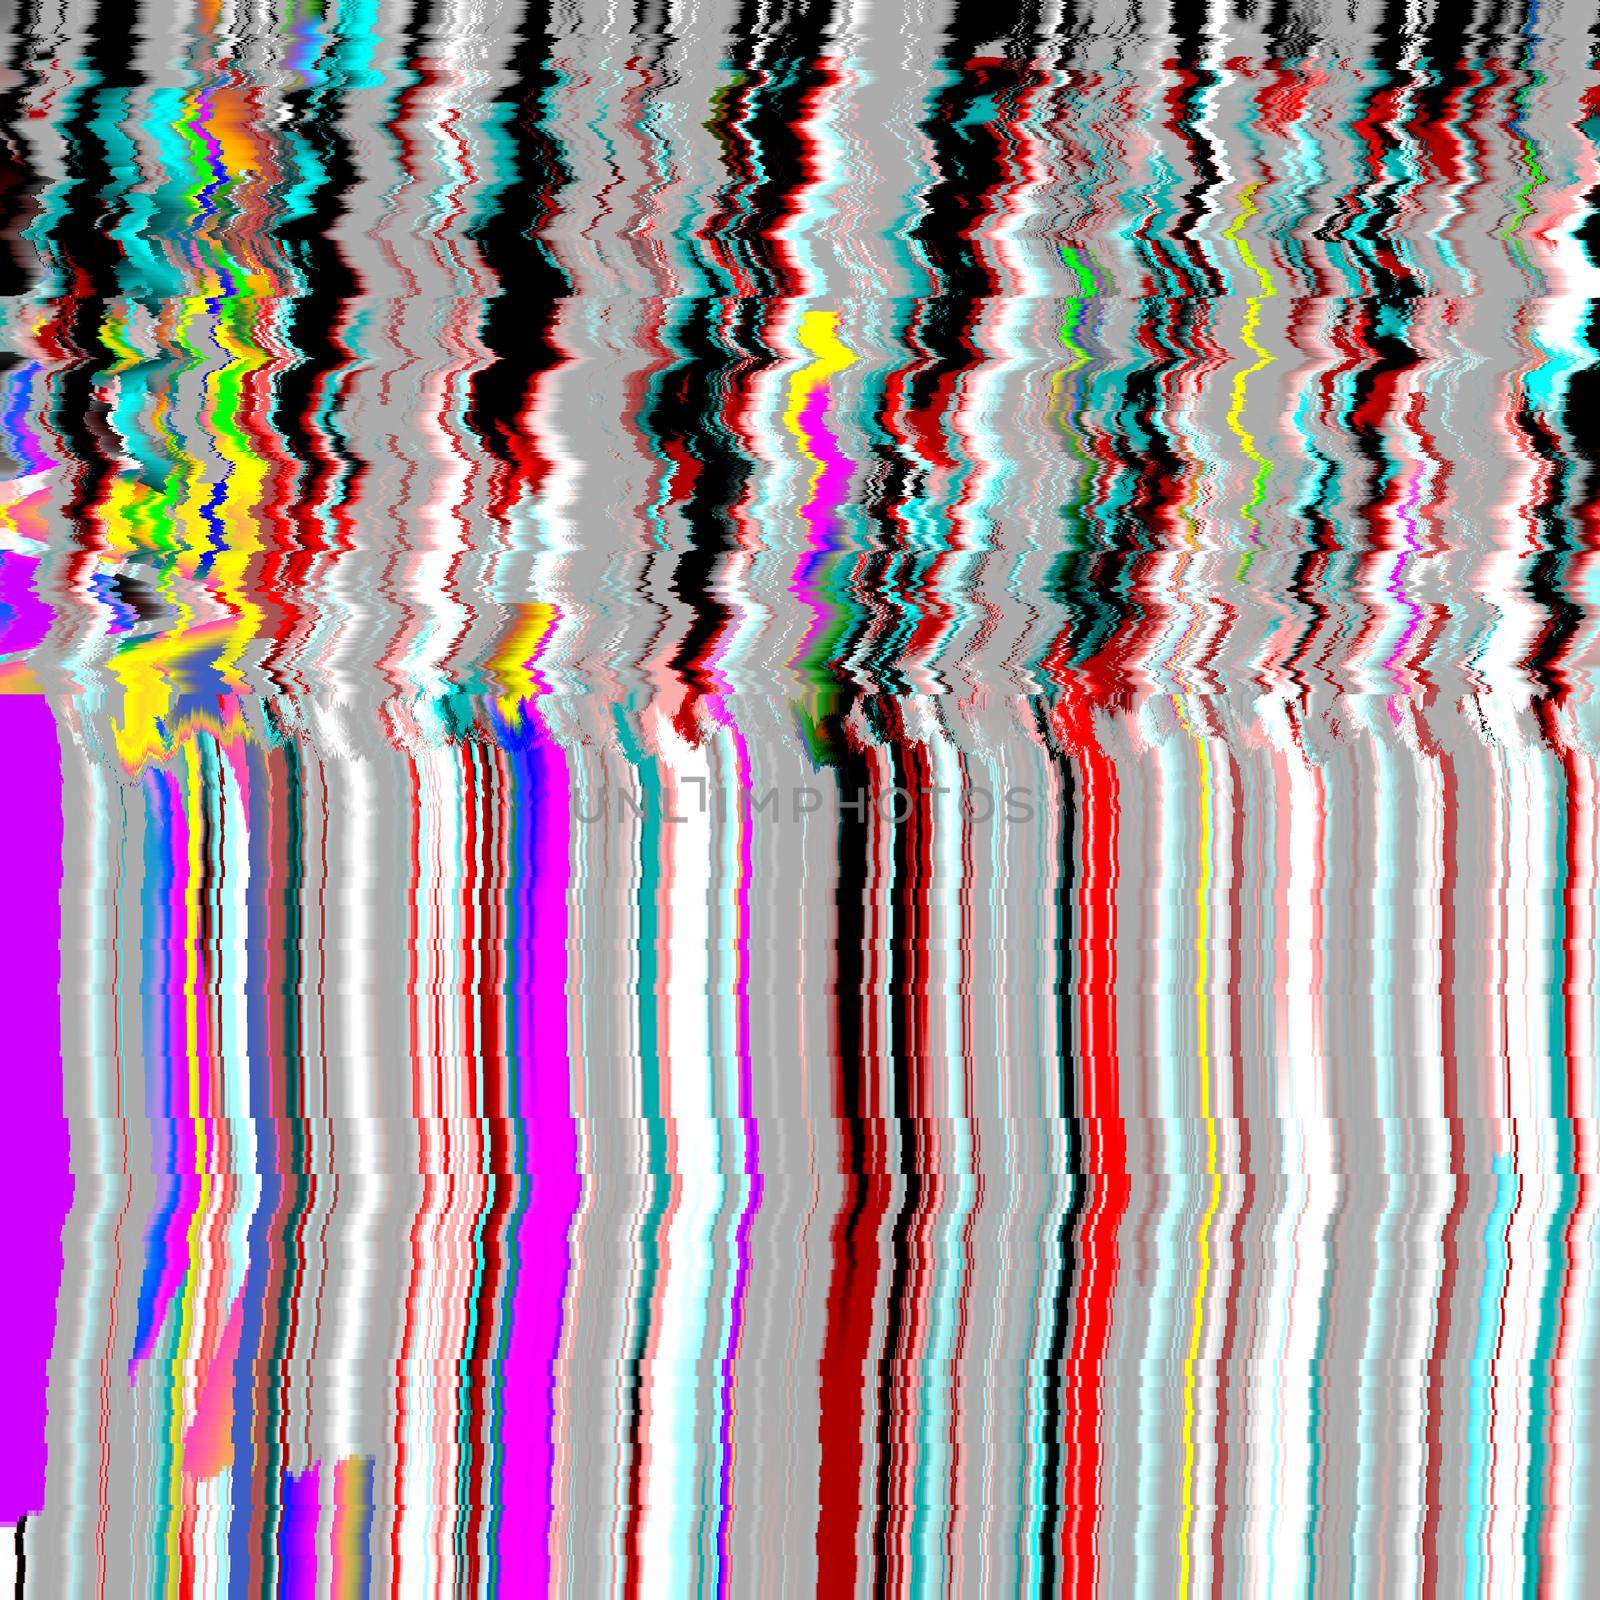 Glitch TV psychedelic Noise background Old screen error Digital pixel noise abstract design. Photo glitch. Television signal fail. Technical problem grunge wallpaper by DesignAB